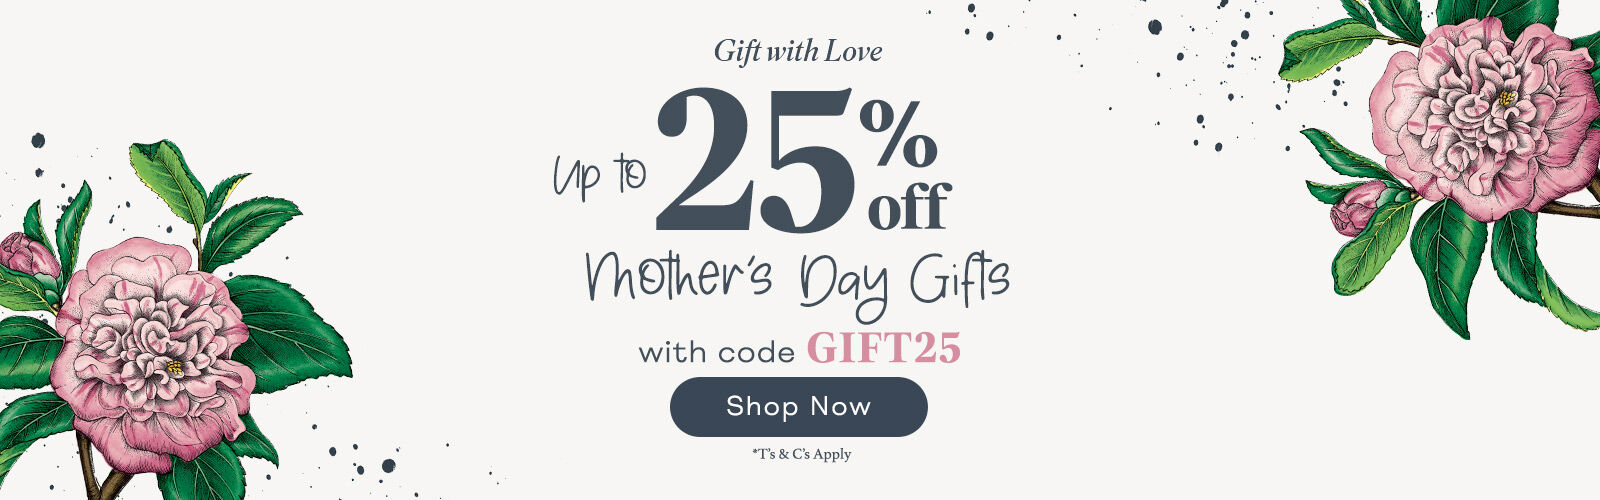 Save 25% on Selected Mother's Day Gifts